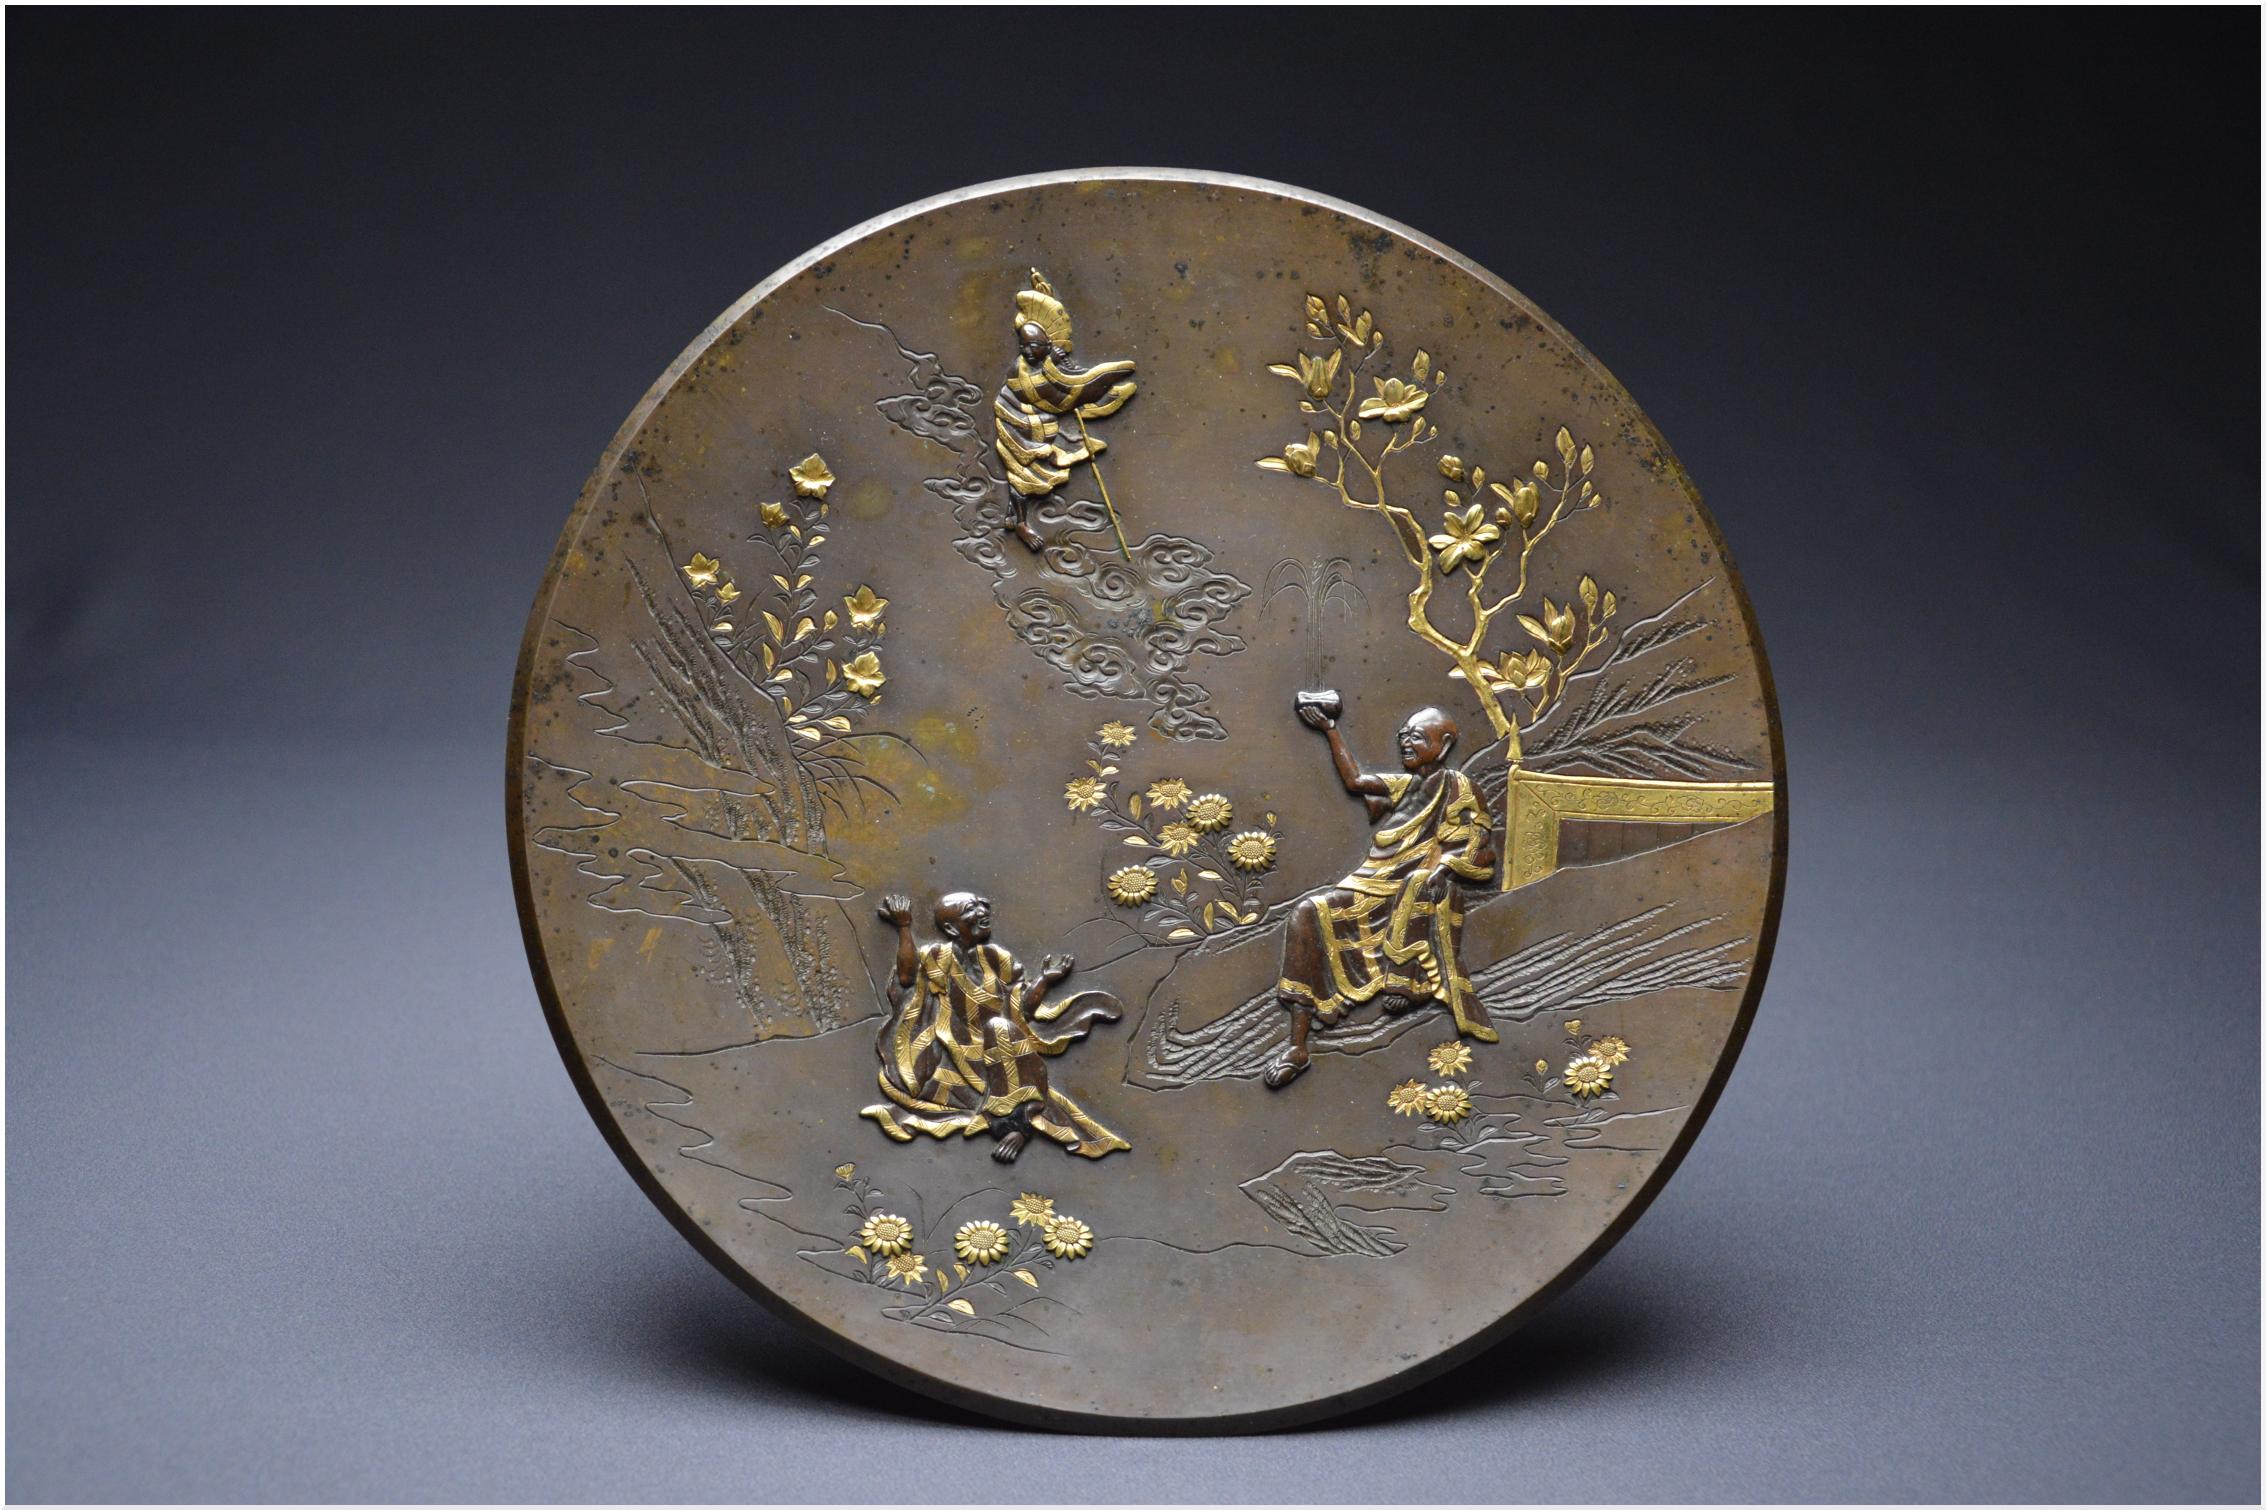 Japan
Meiji period (1868 – 1912)
Copper alloy with brown patina and gilt highlights
26.8cm
Metal weathering
Former French private collection

Japanese circular bronze dish with engraved decoration of a bucolic landscape and three ahrats